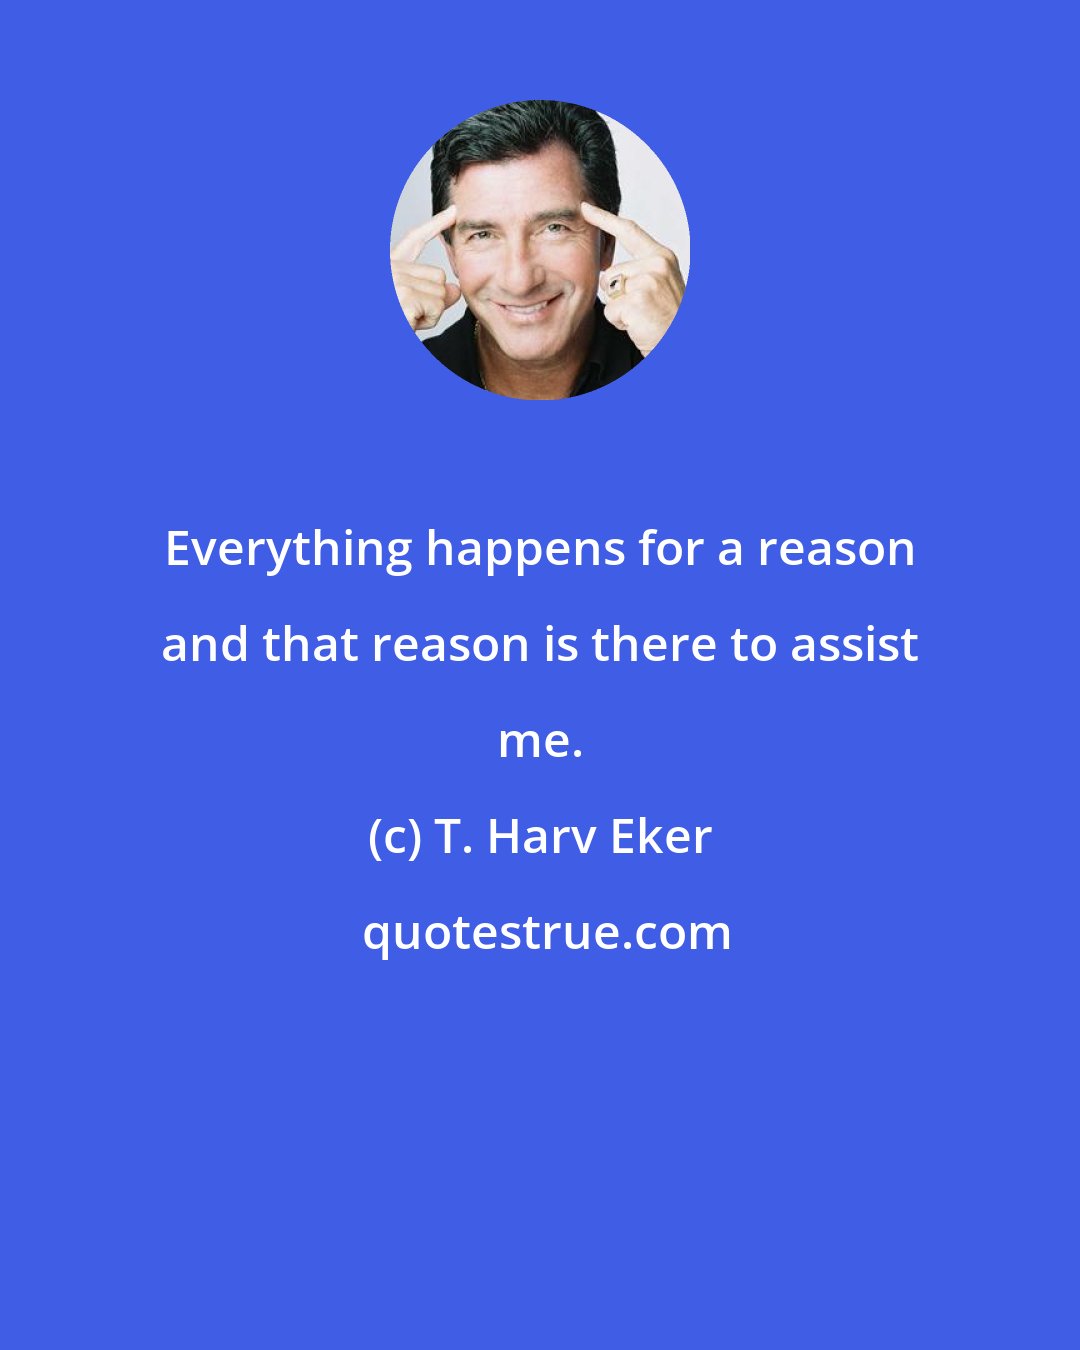 T. Harv Eker: Everything happens for a reason and that reason is there to assist me.